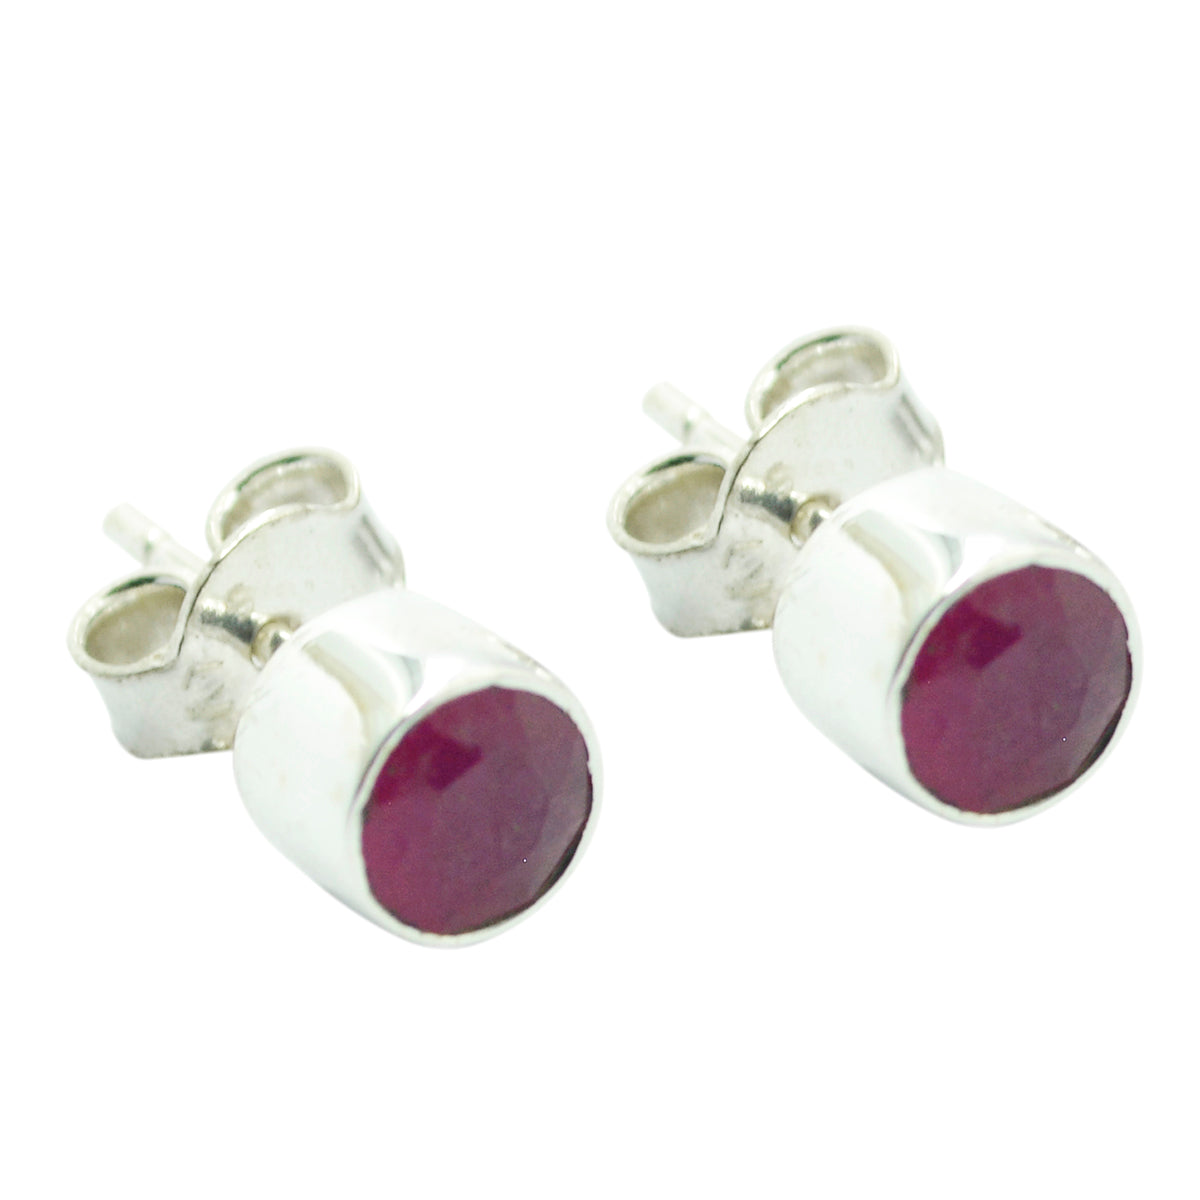 Riyo Nice Gemstone round Faceted Red Indian Ruby Silver Earrings engagement gift